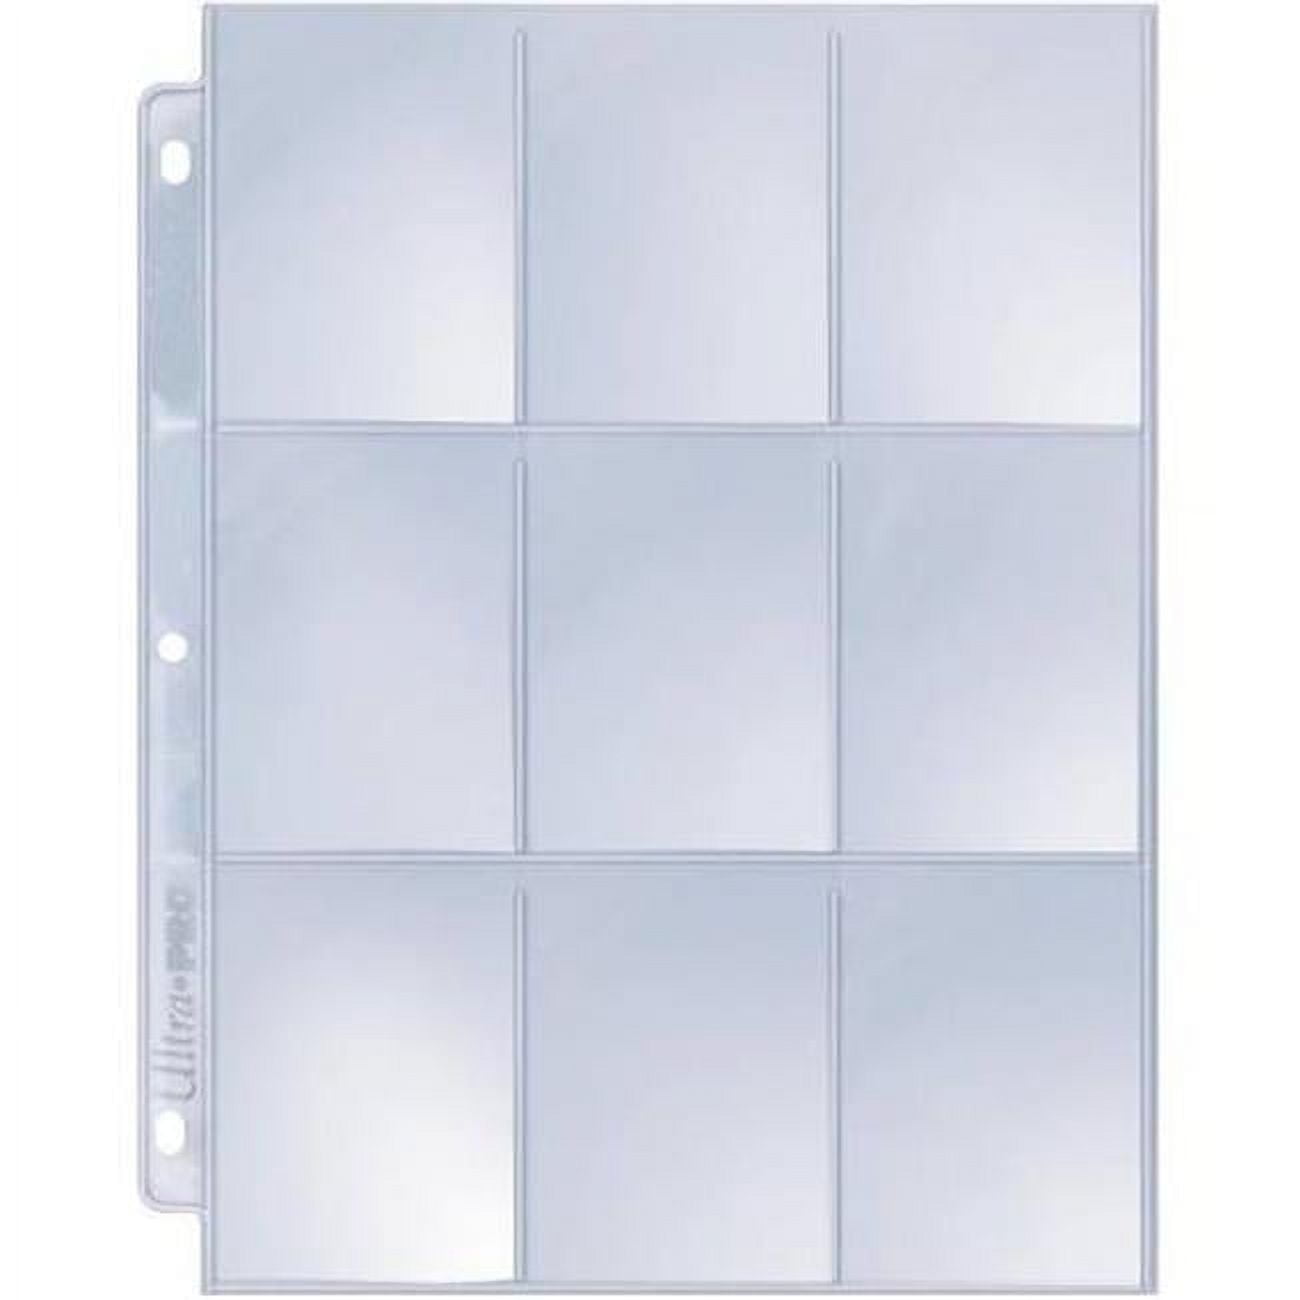 Picture of 9 Pocket Silver Series Page (25 pack)